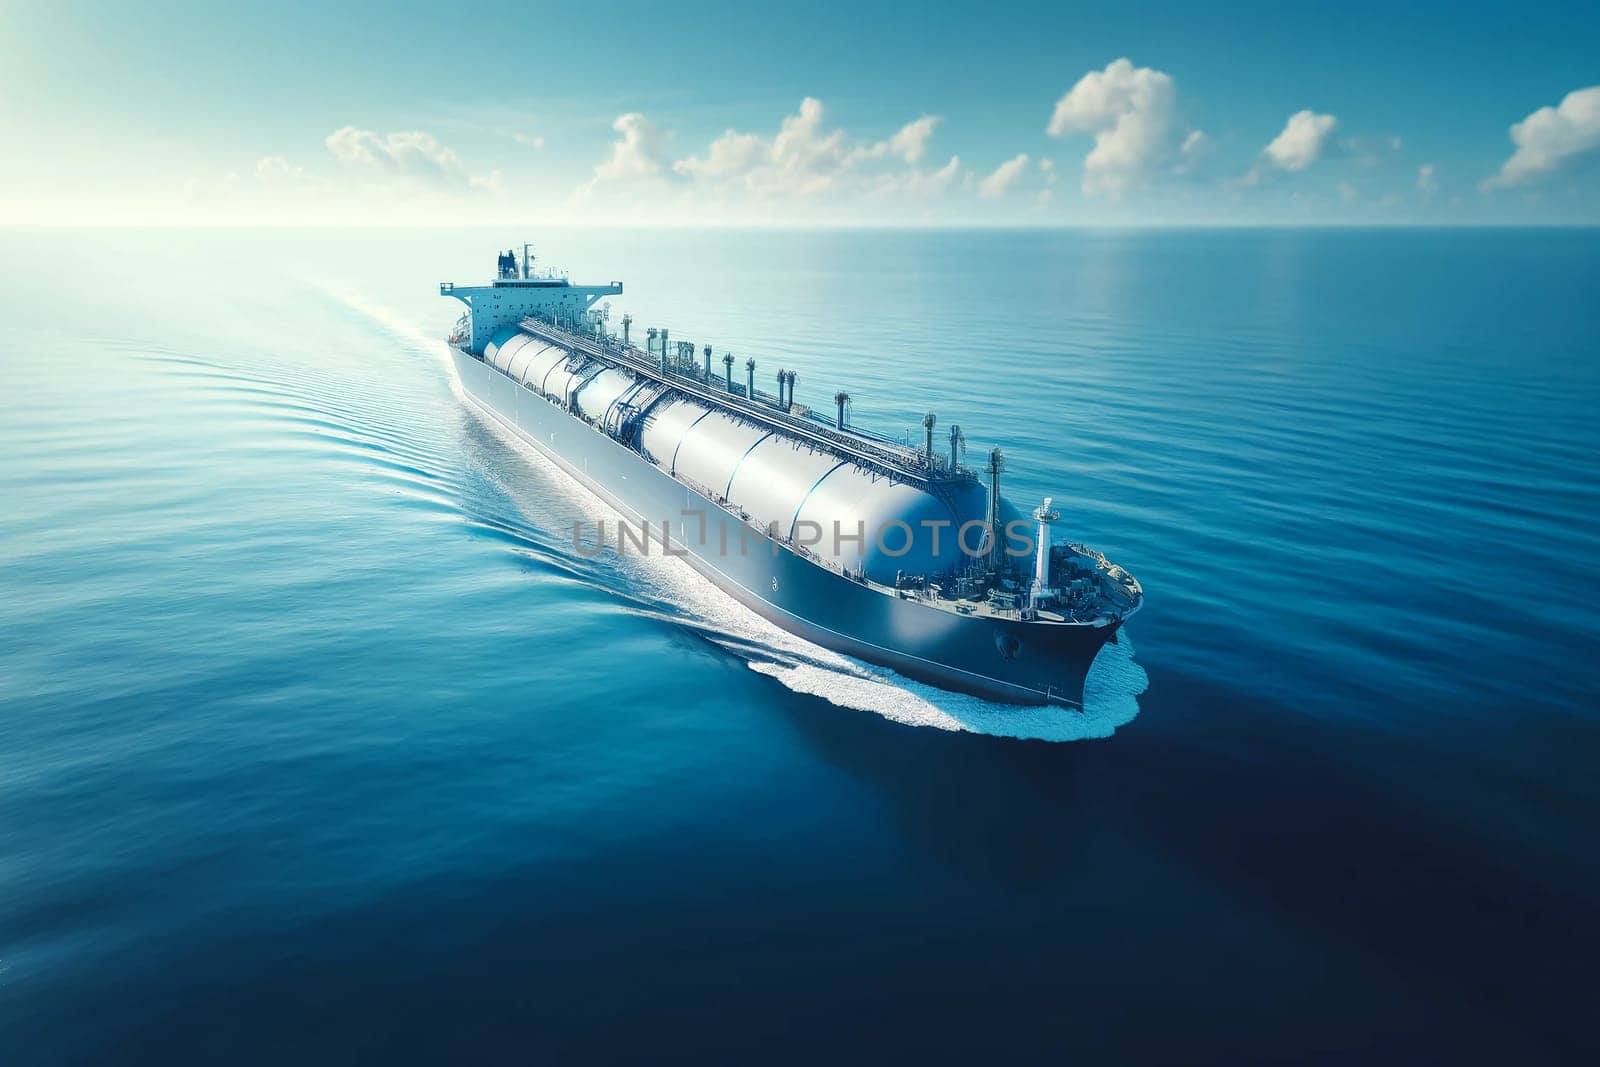 a liquefied gas tanker with a streamlined hull and cylindrical storage tanks against a calm blue ocean background by Annado